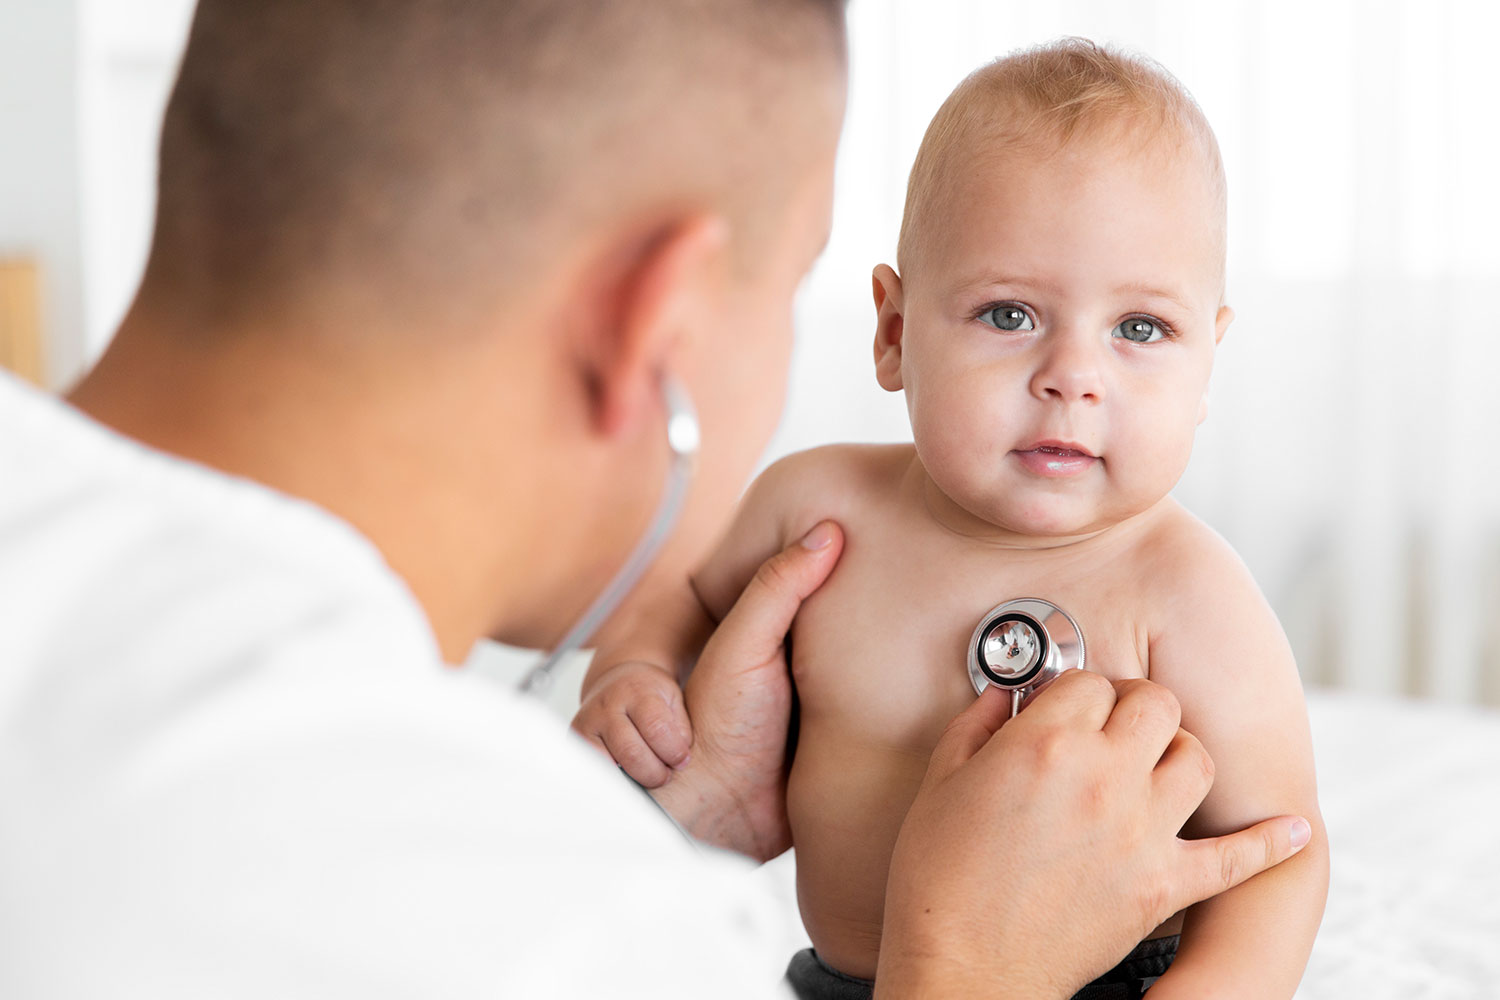 RSV Symptoms, Causes, and Treatment